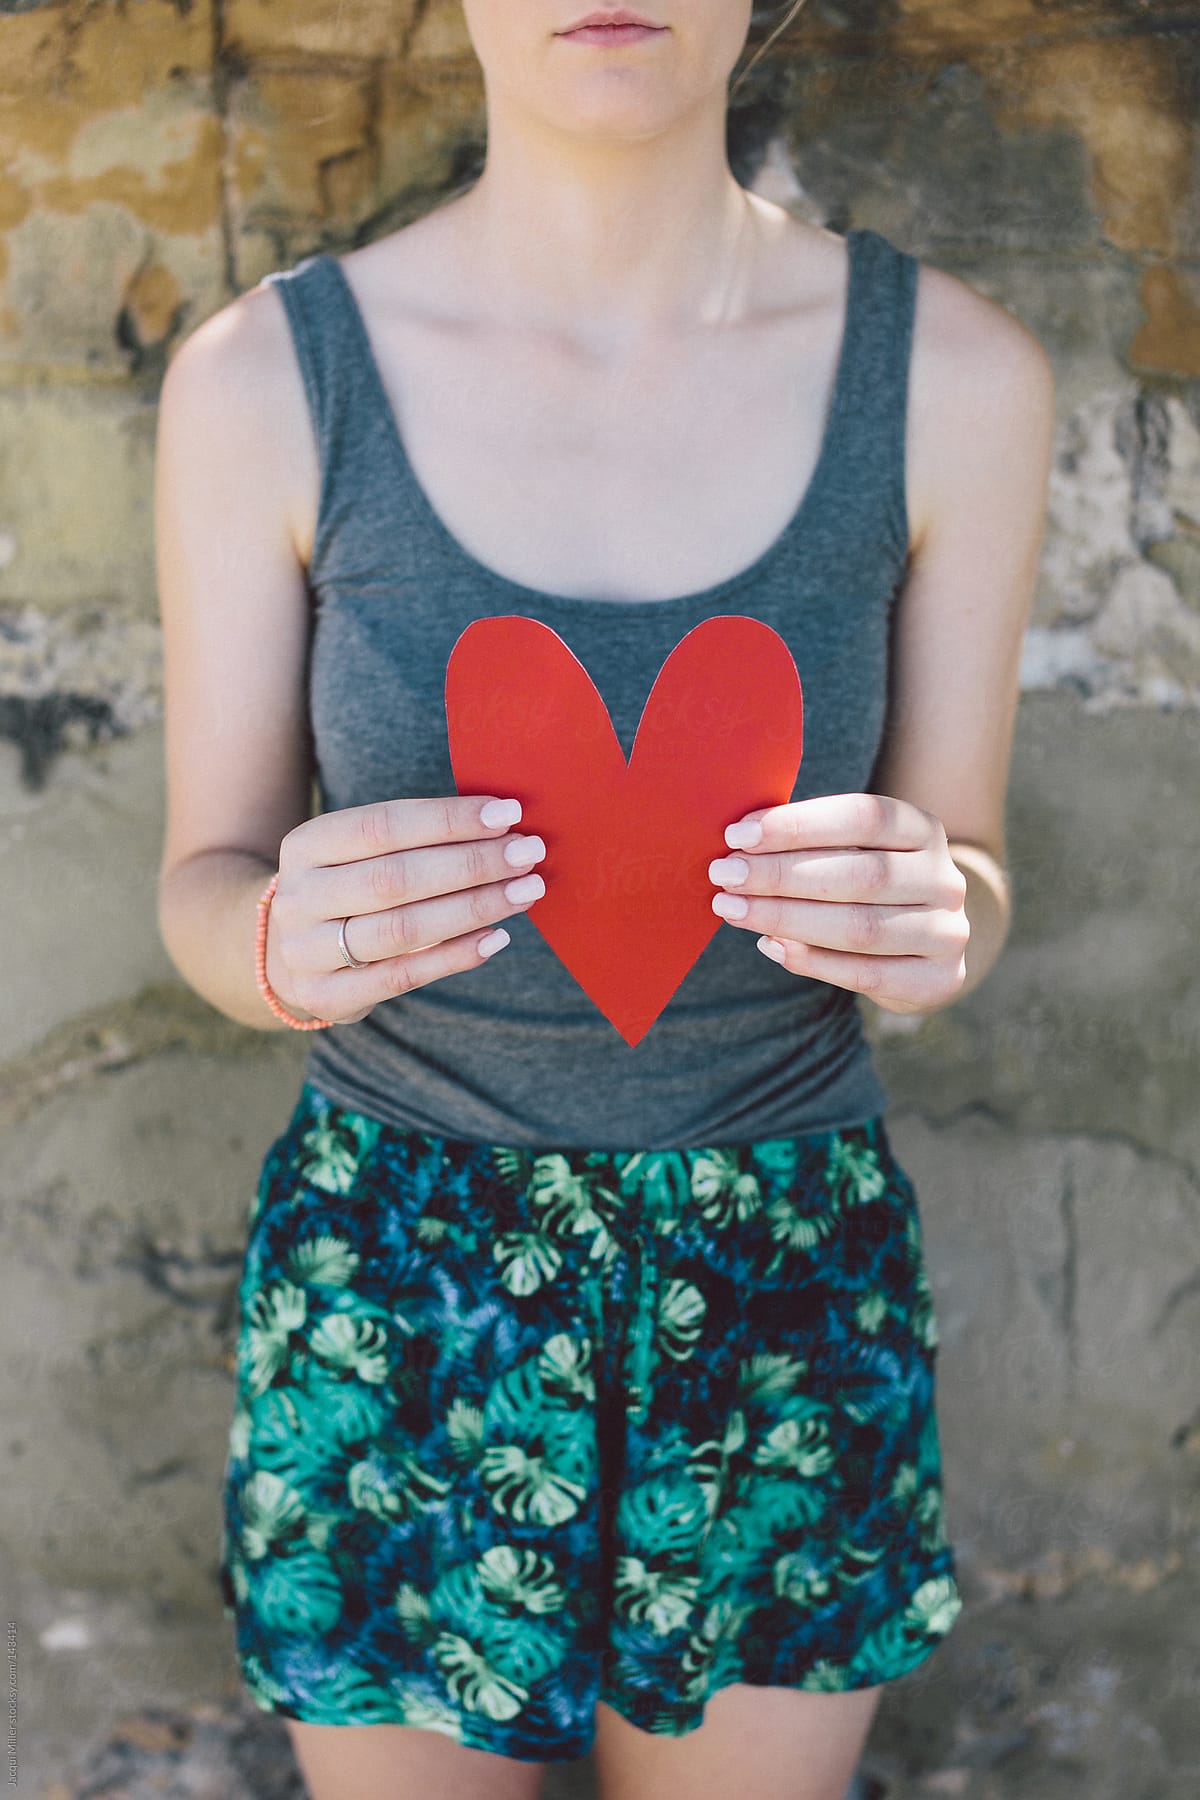 Teenage girl holds a red paper heart in front of her body